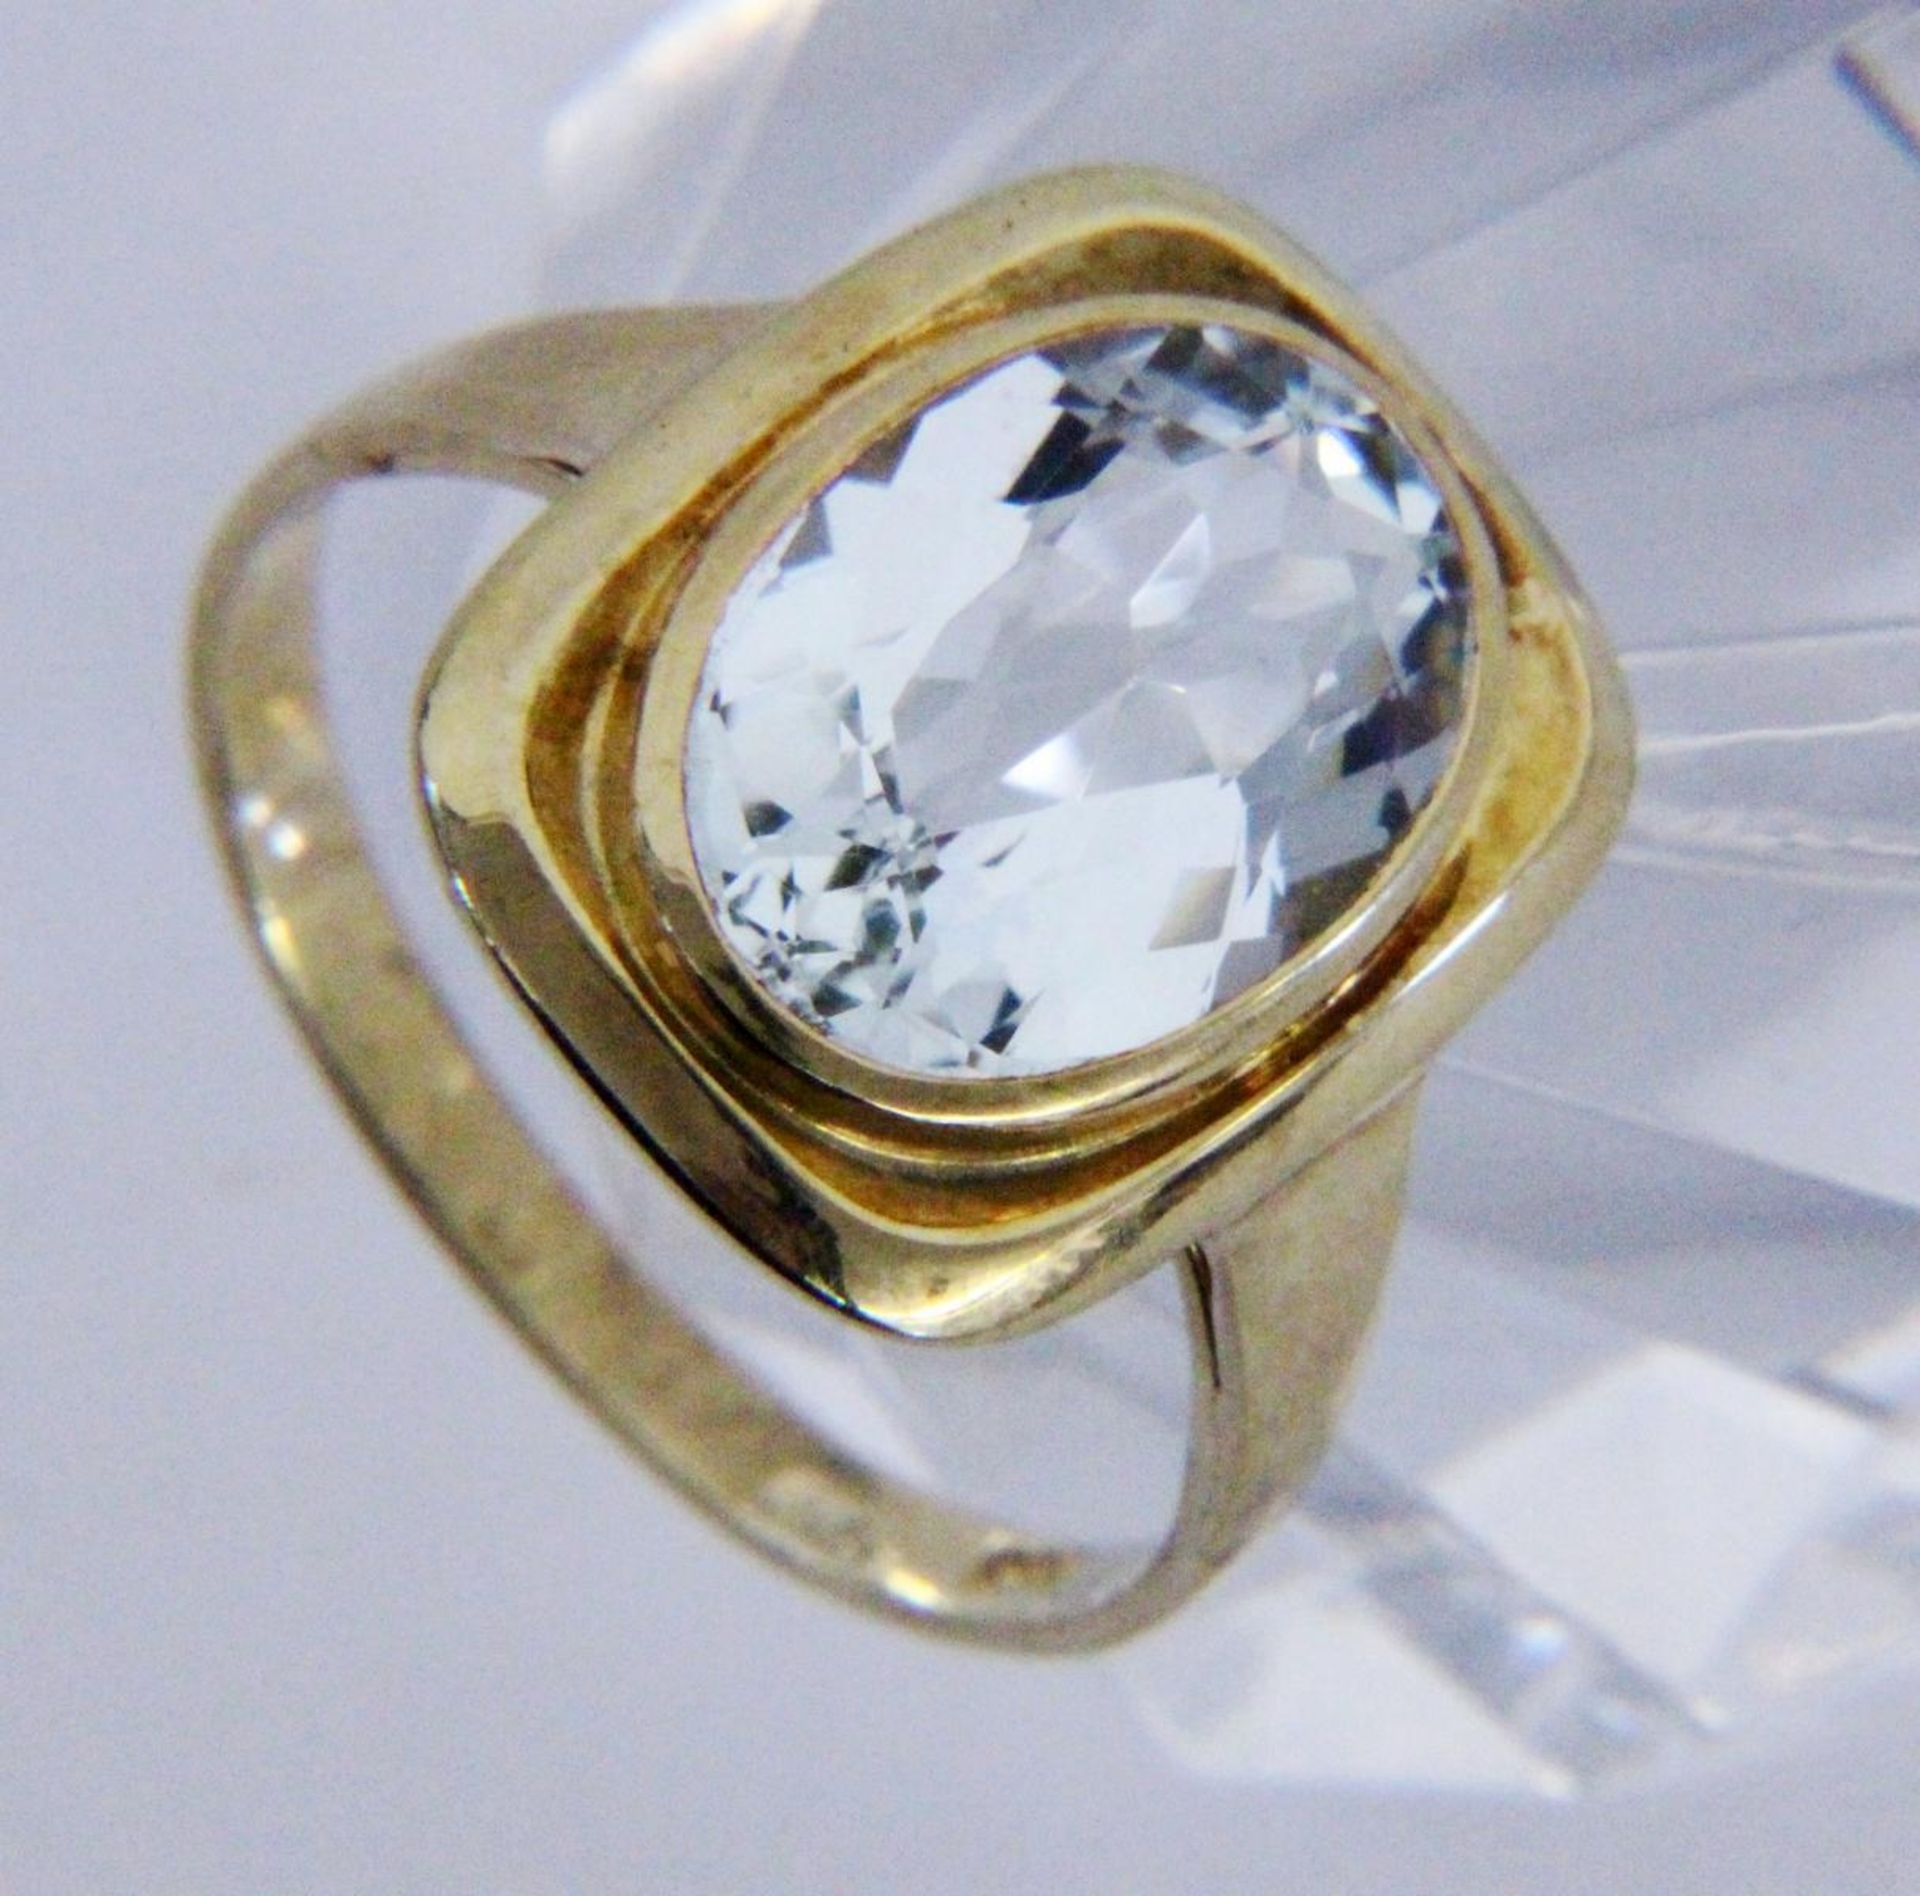 A LADIES RING 585/000 yellow gold with aquamarine. Ring size 57, gross weight approx. 3.7